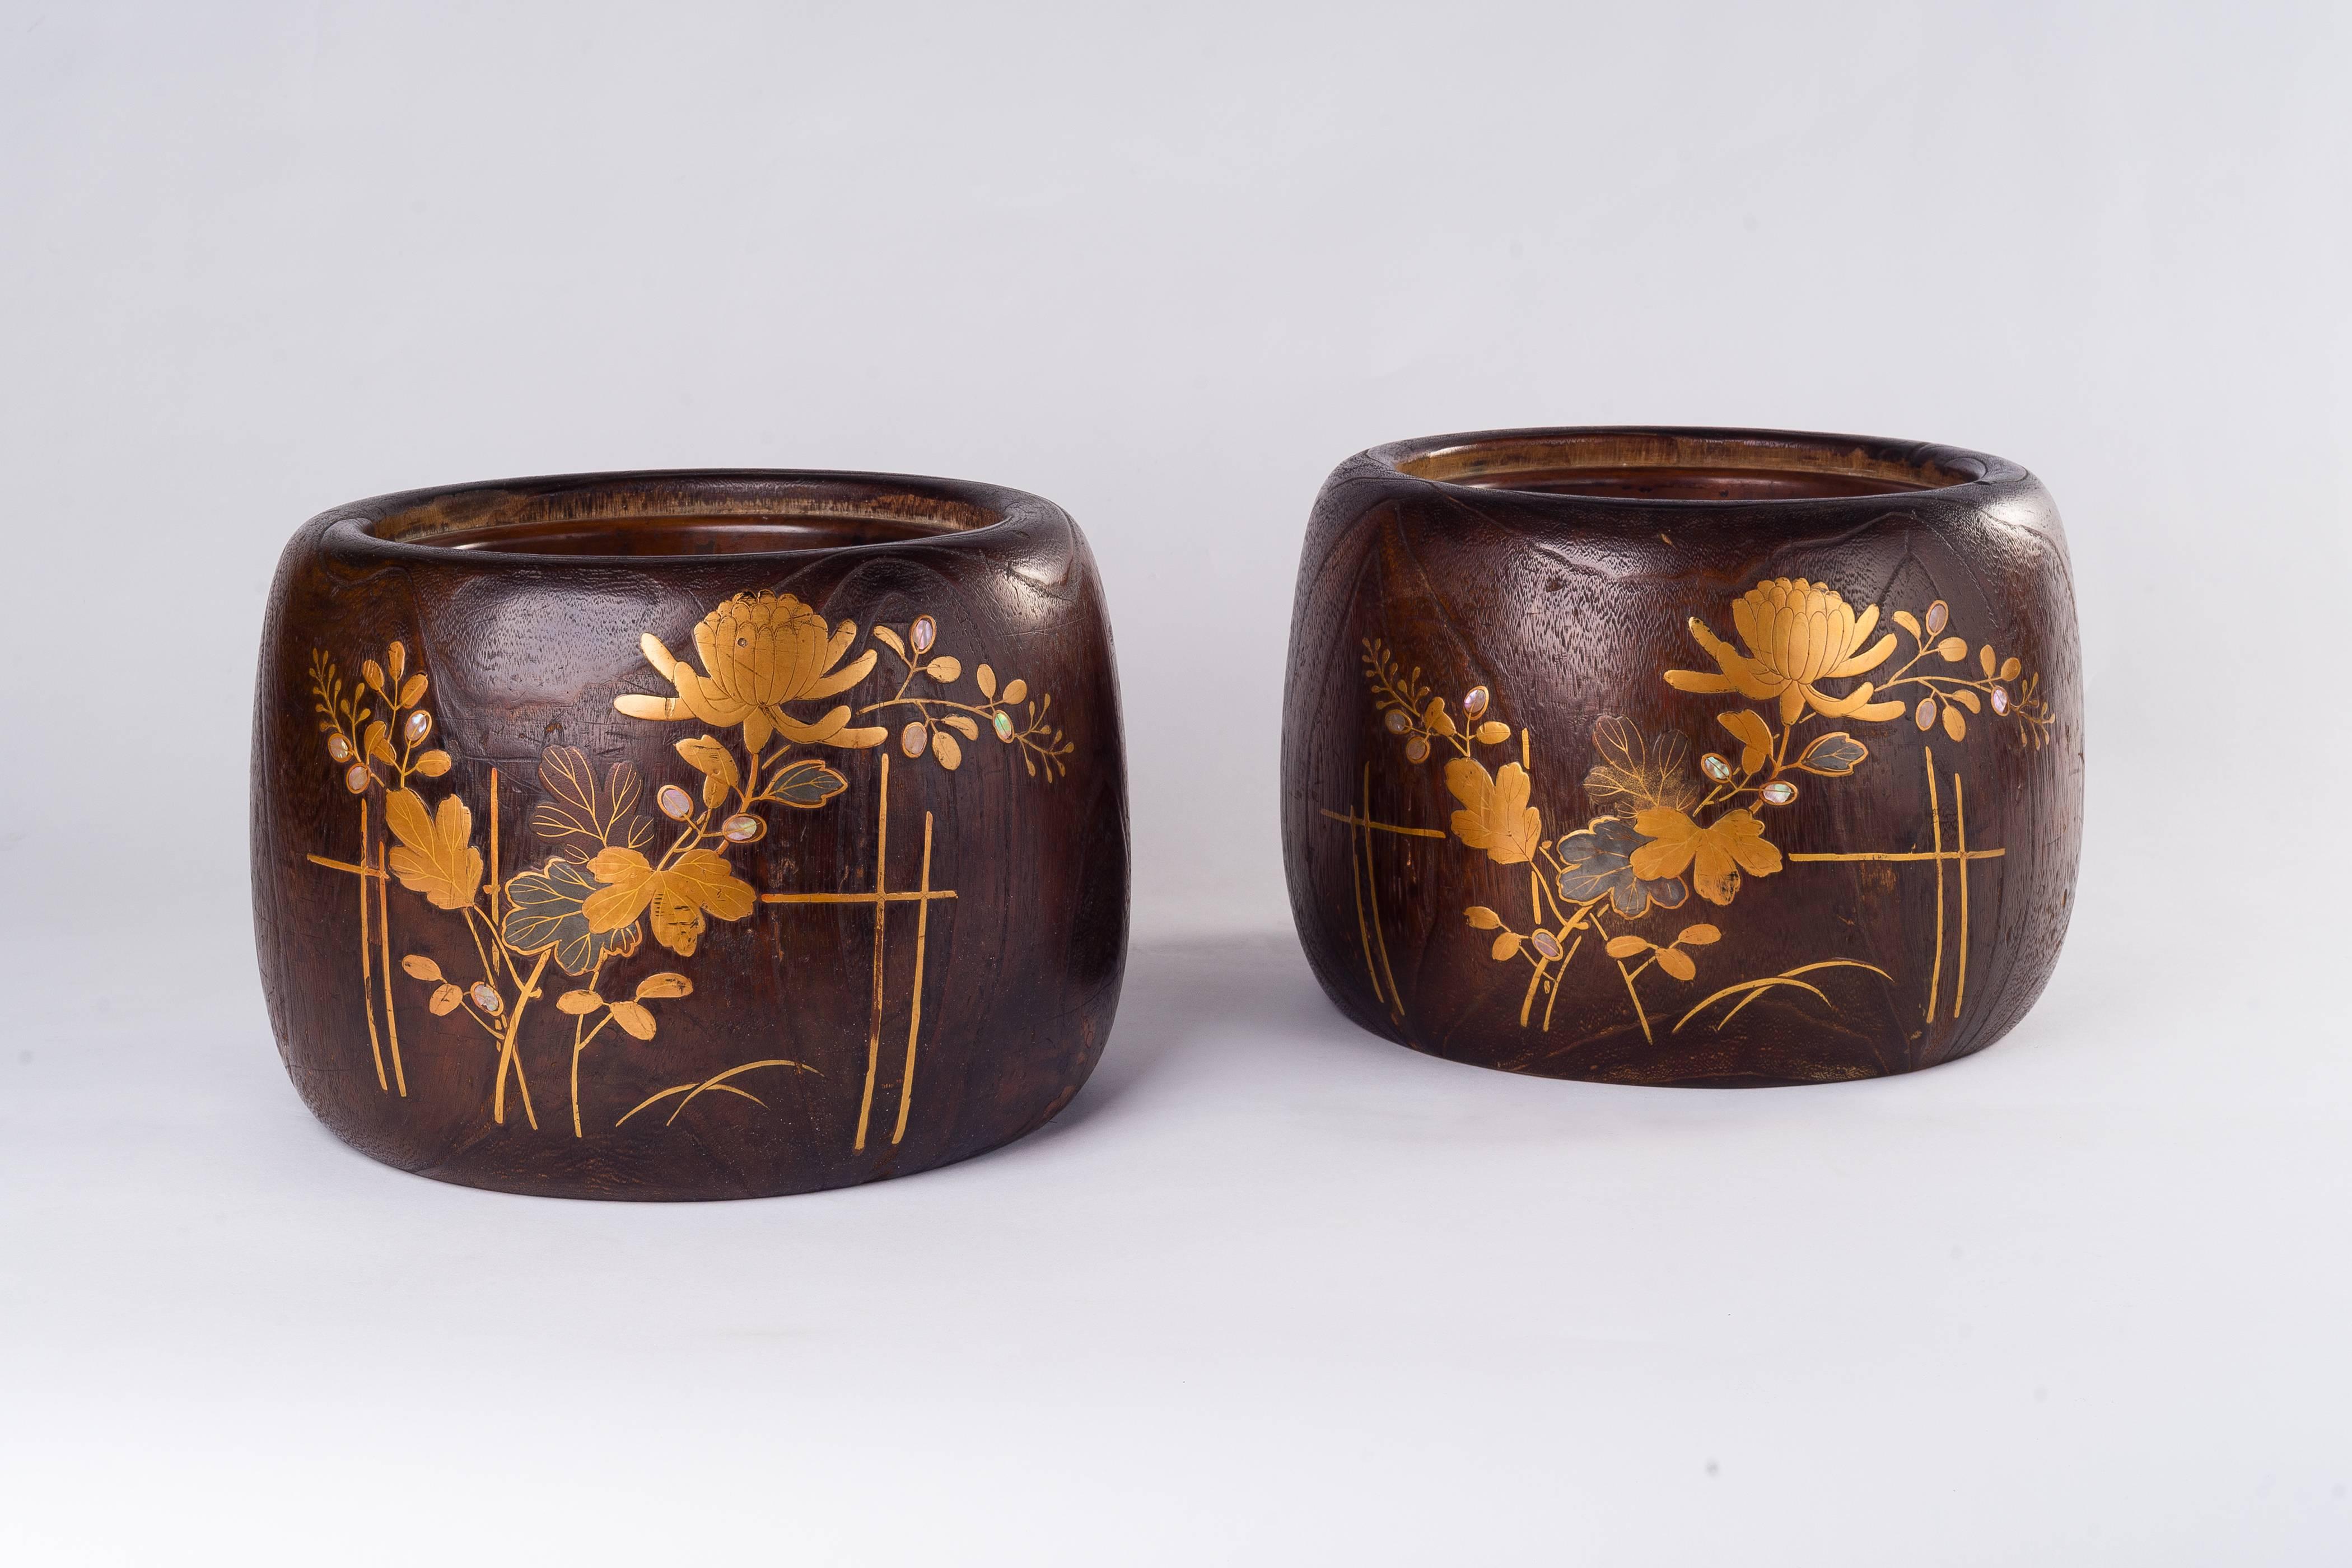 The handcrafted pair of Japanese wooden hibachi (fire bowl) is finely decorated with chrysanthemum tree and foliage, and executed meticulously in hand-worked make gold lacquer work with brass and mother-of-pearl inlay. The circular hibachi lined